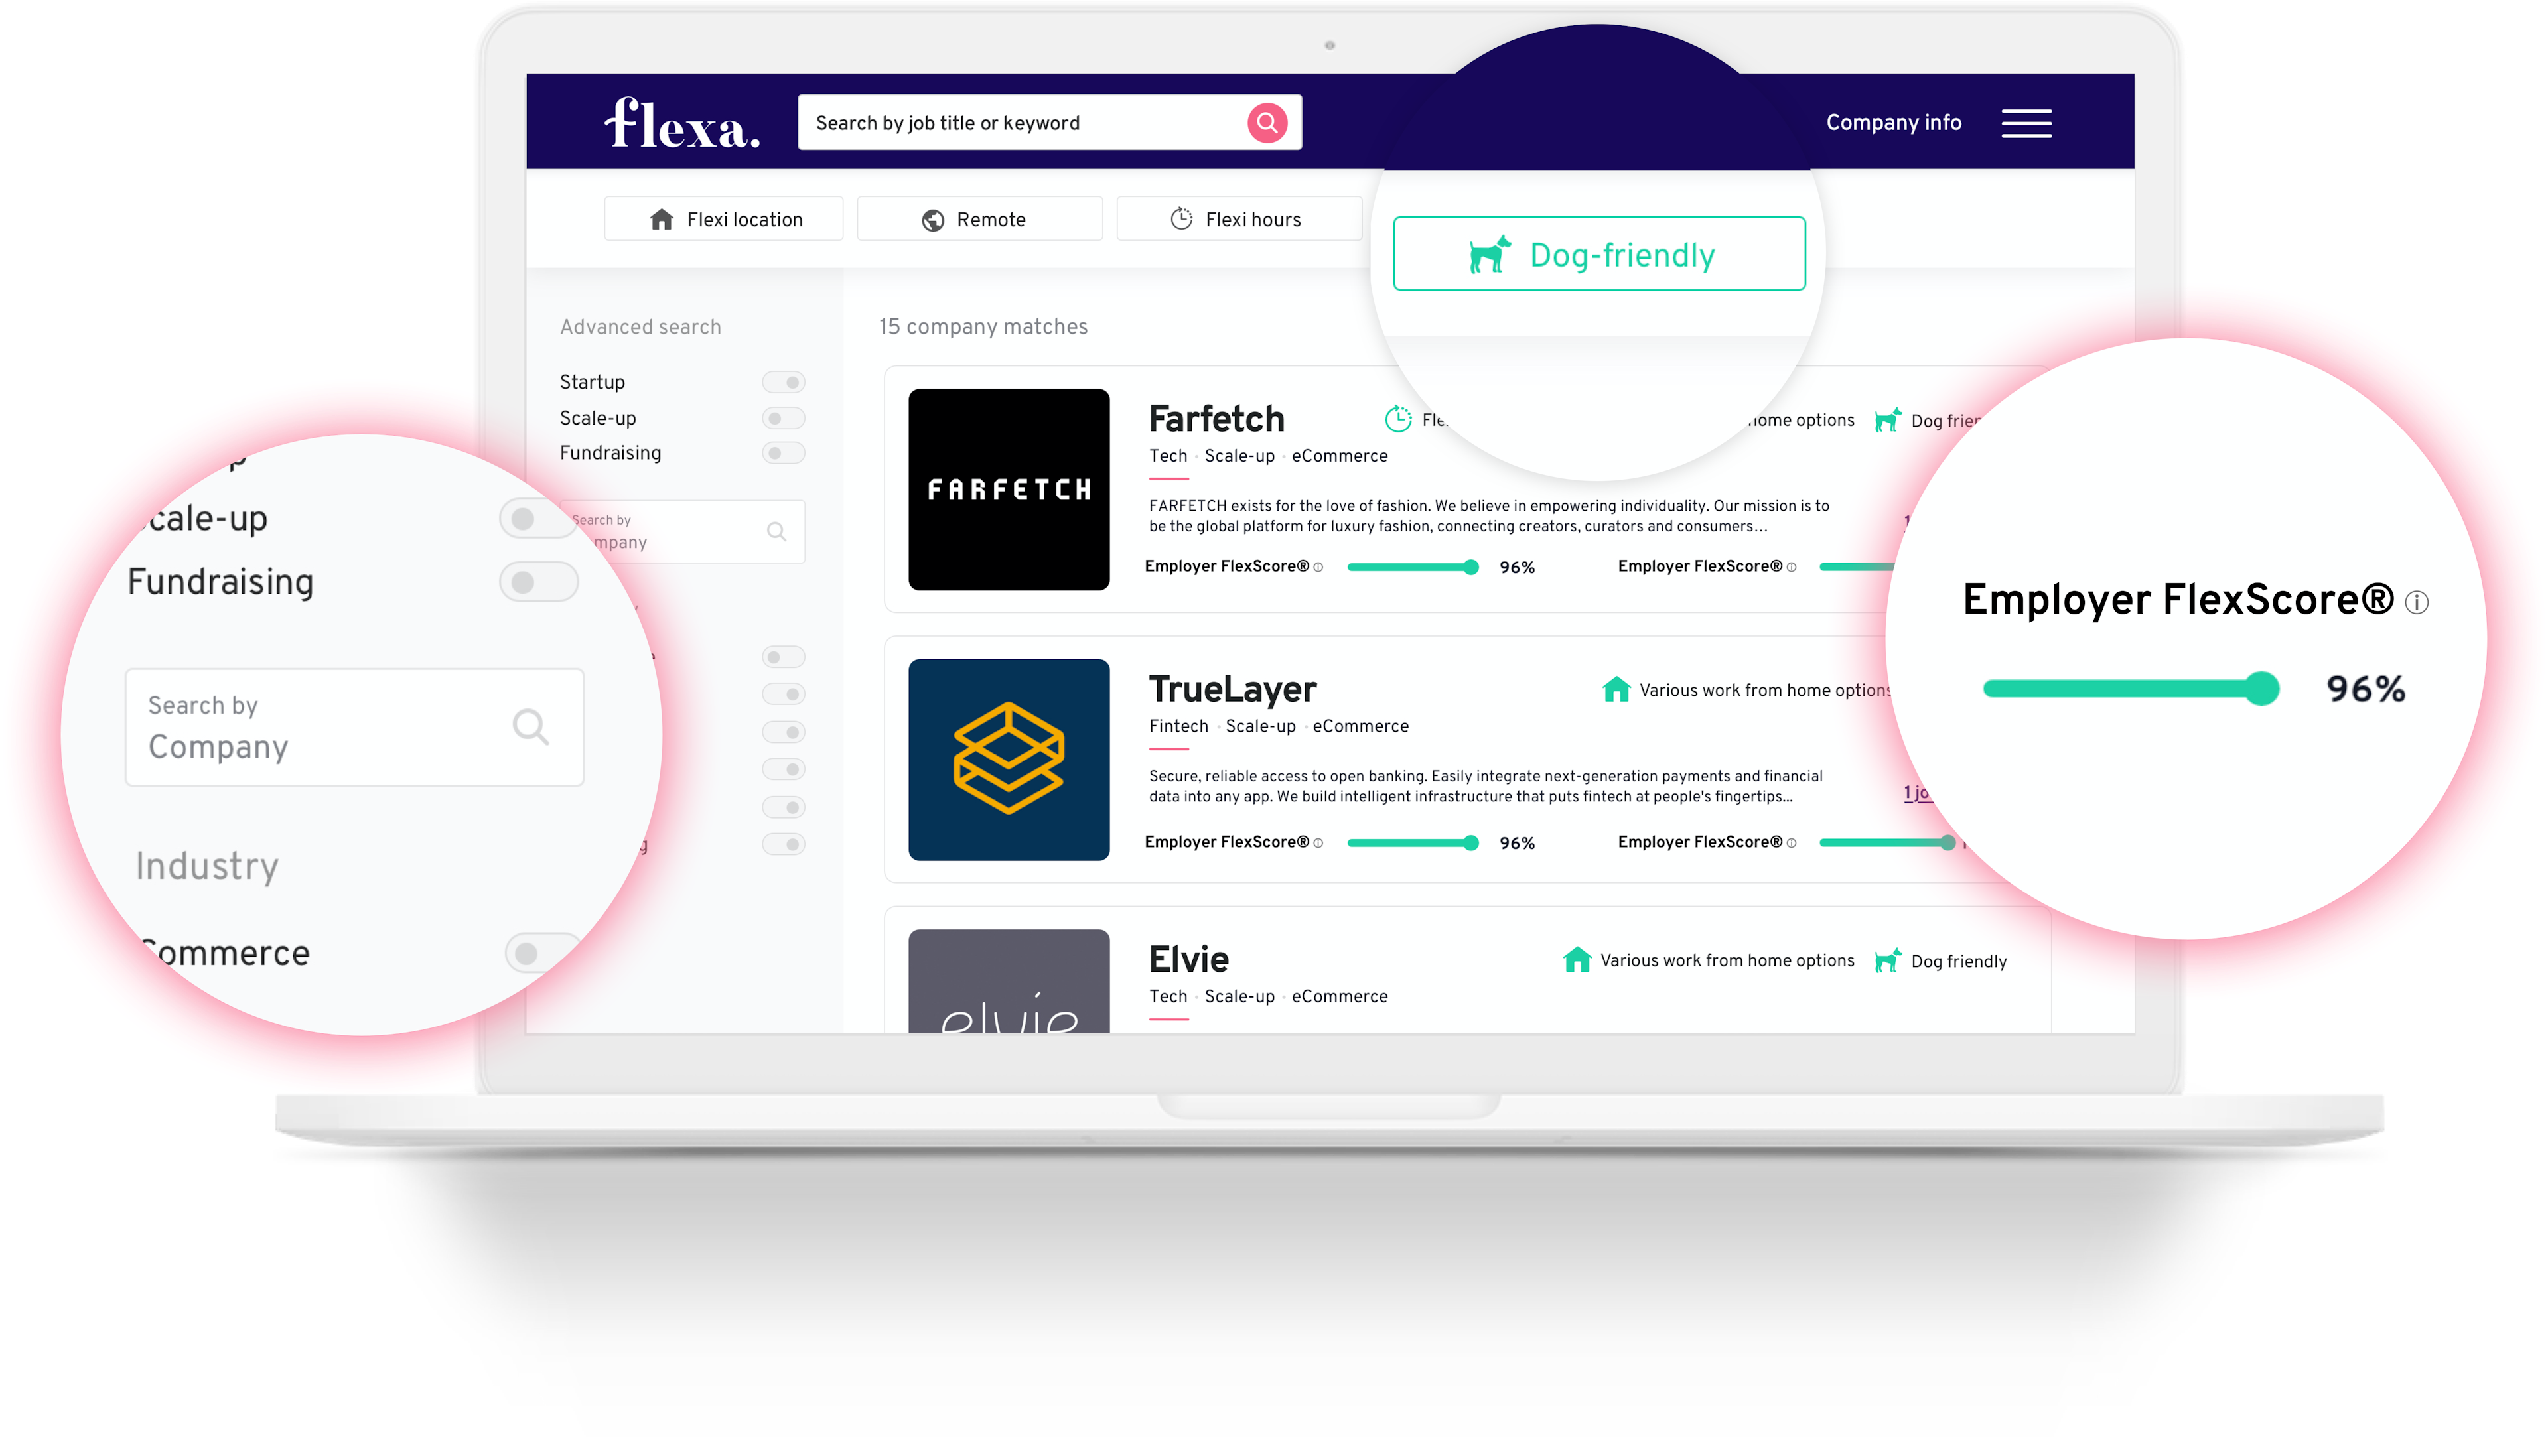 Flexa lets job seekers search for roles by how flexible a company is